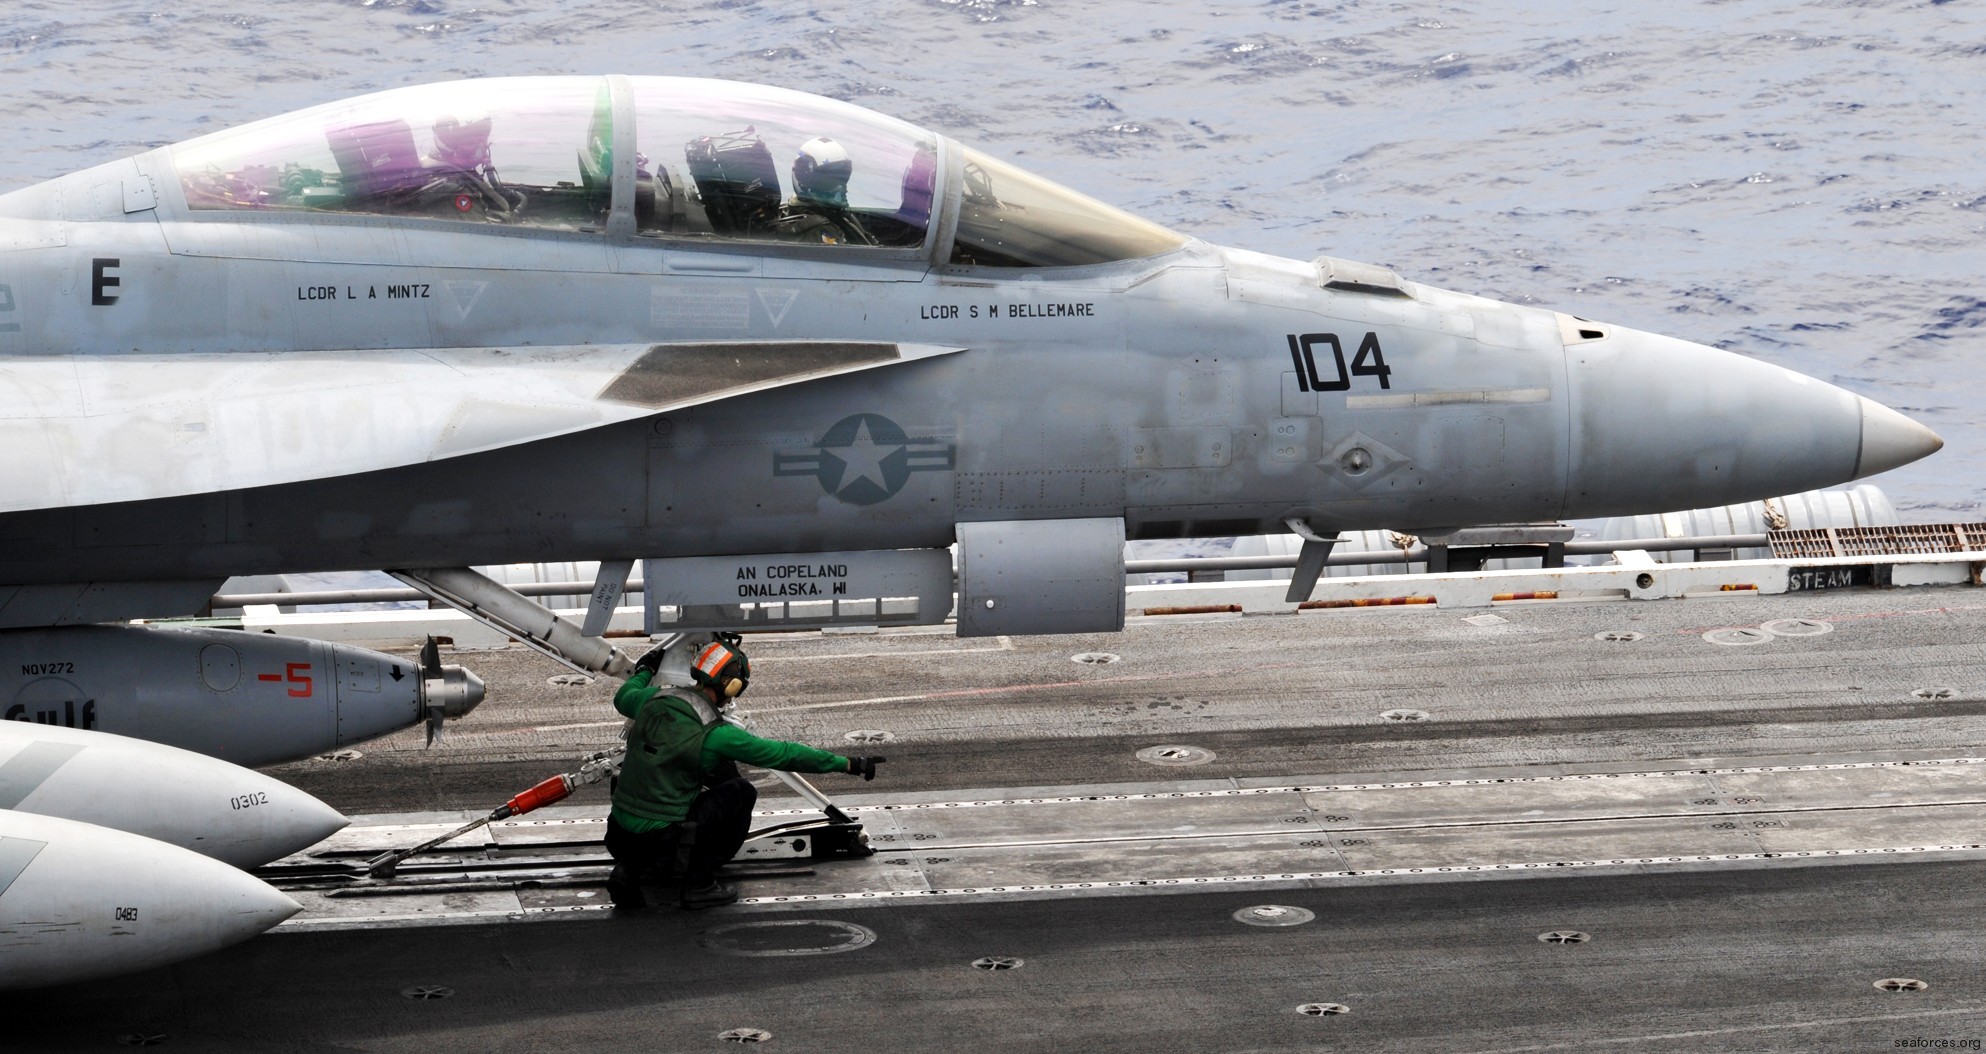 vfa-2 bounty hunters strike fighter squadron us navy f/a-18f super hornet carrier air wing cvw-2 uss abraham lincoln cvn-72 24